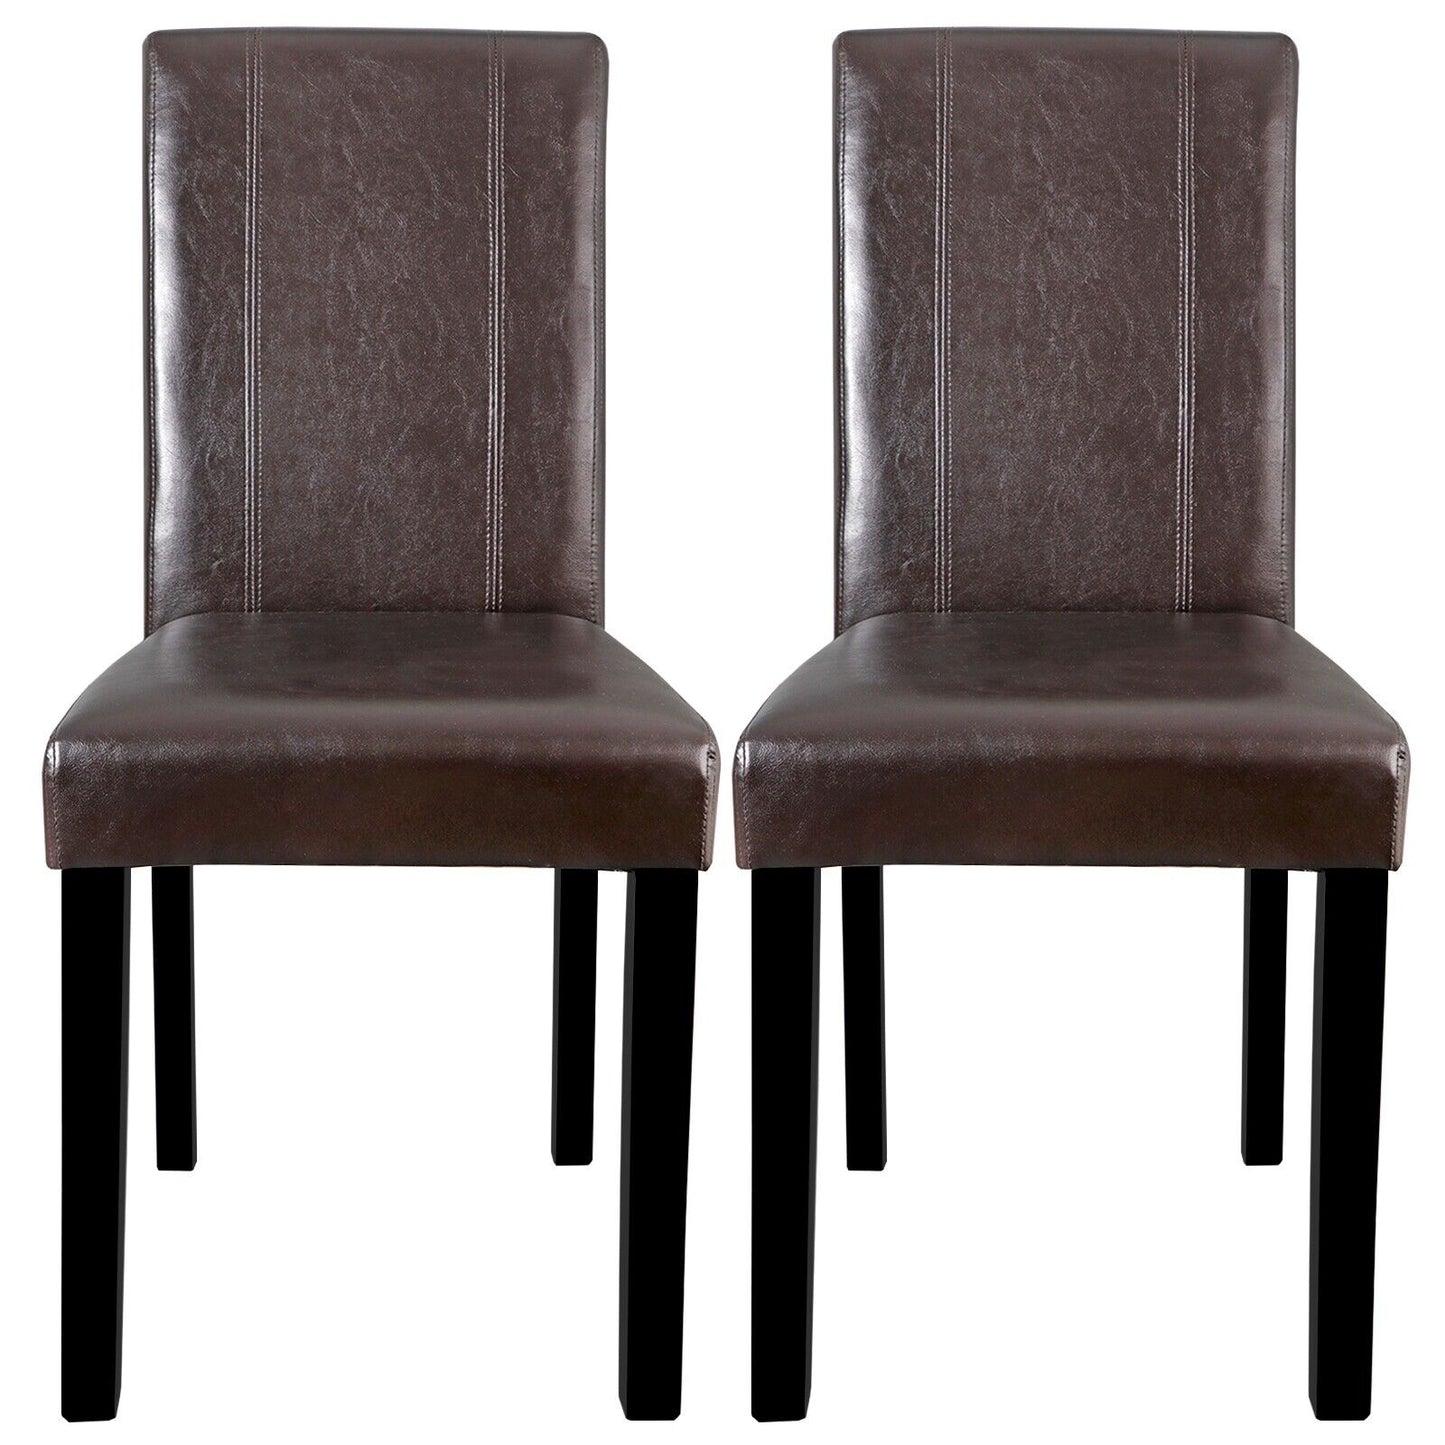 Dining Parson Chair Set of 2 Armless Kitchen Room Brown Leather Backrest Elegant